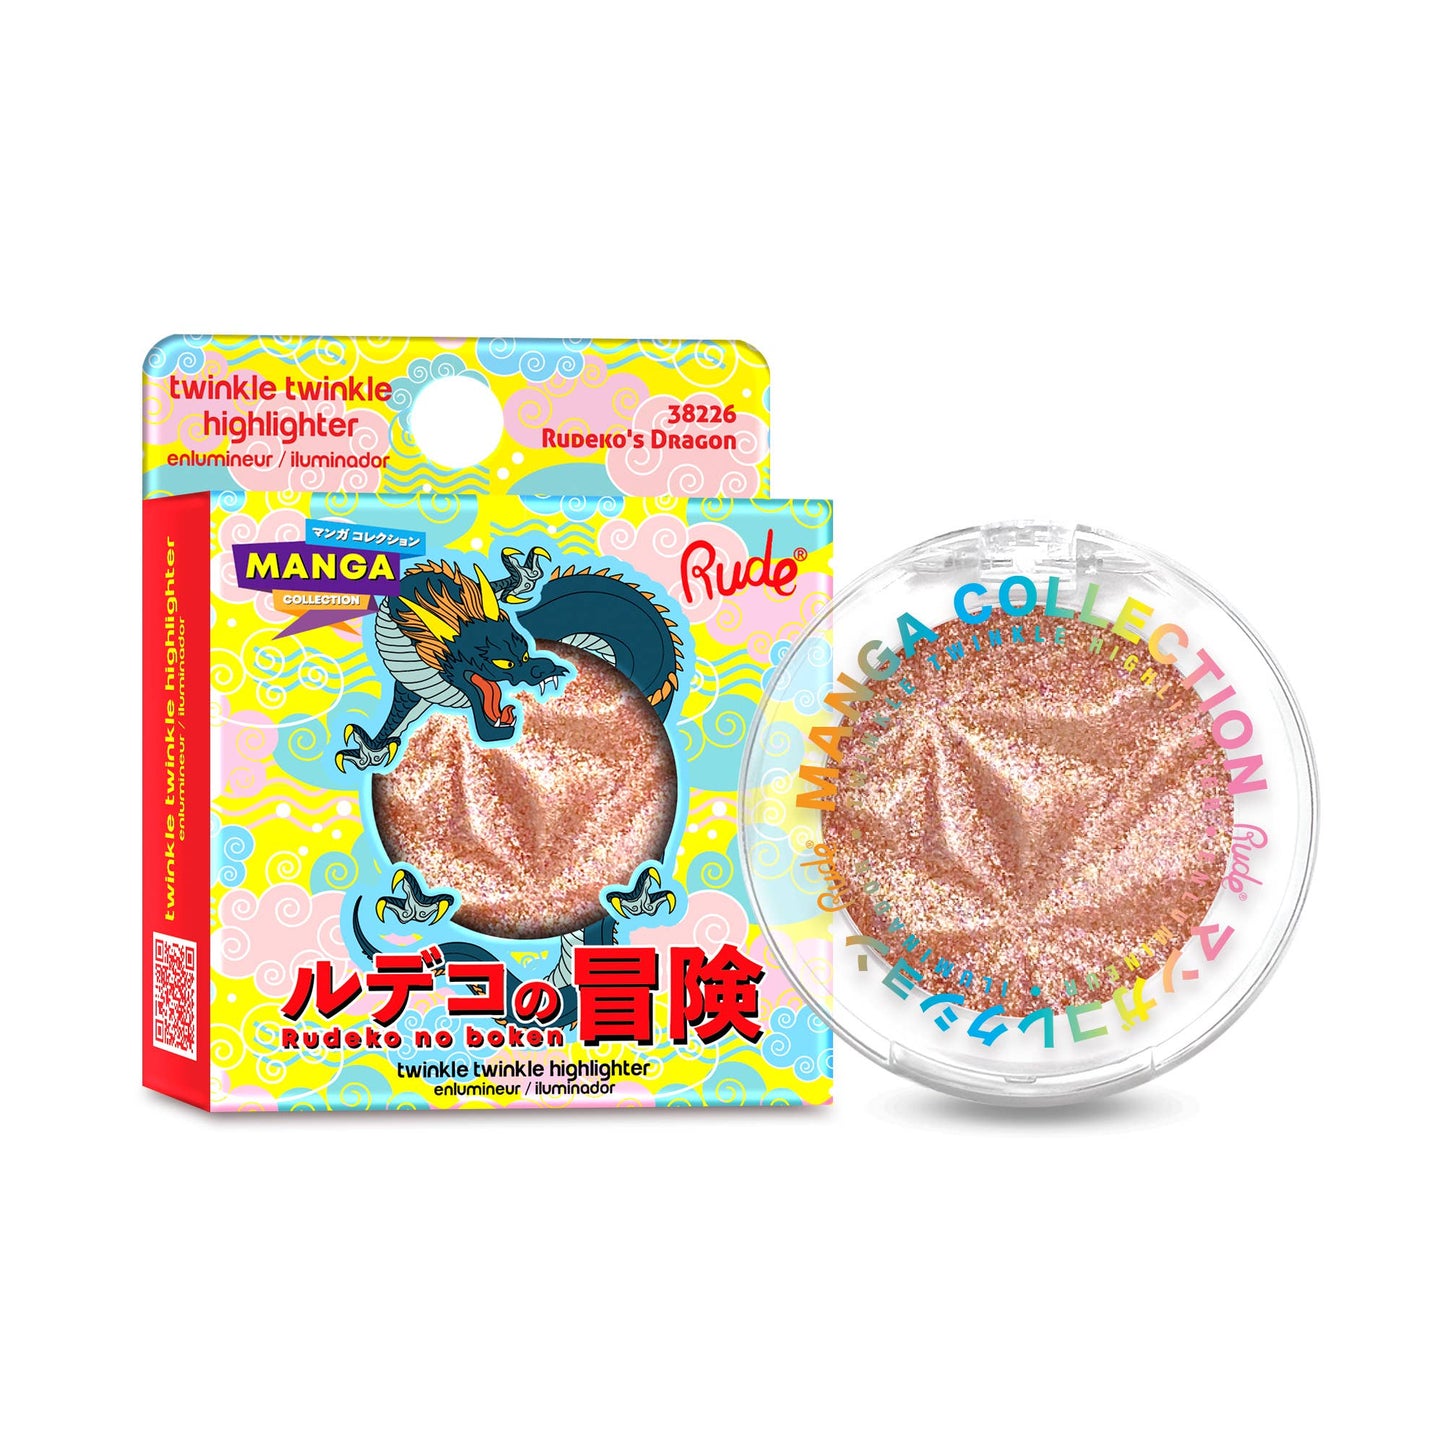 Manga Collection Twinkle Twinkle Highlighter: Sawa-Chan's Heart